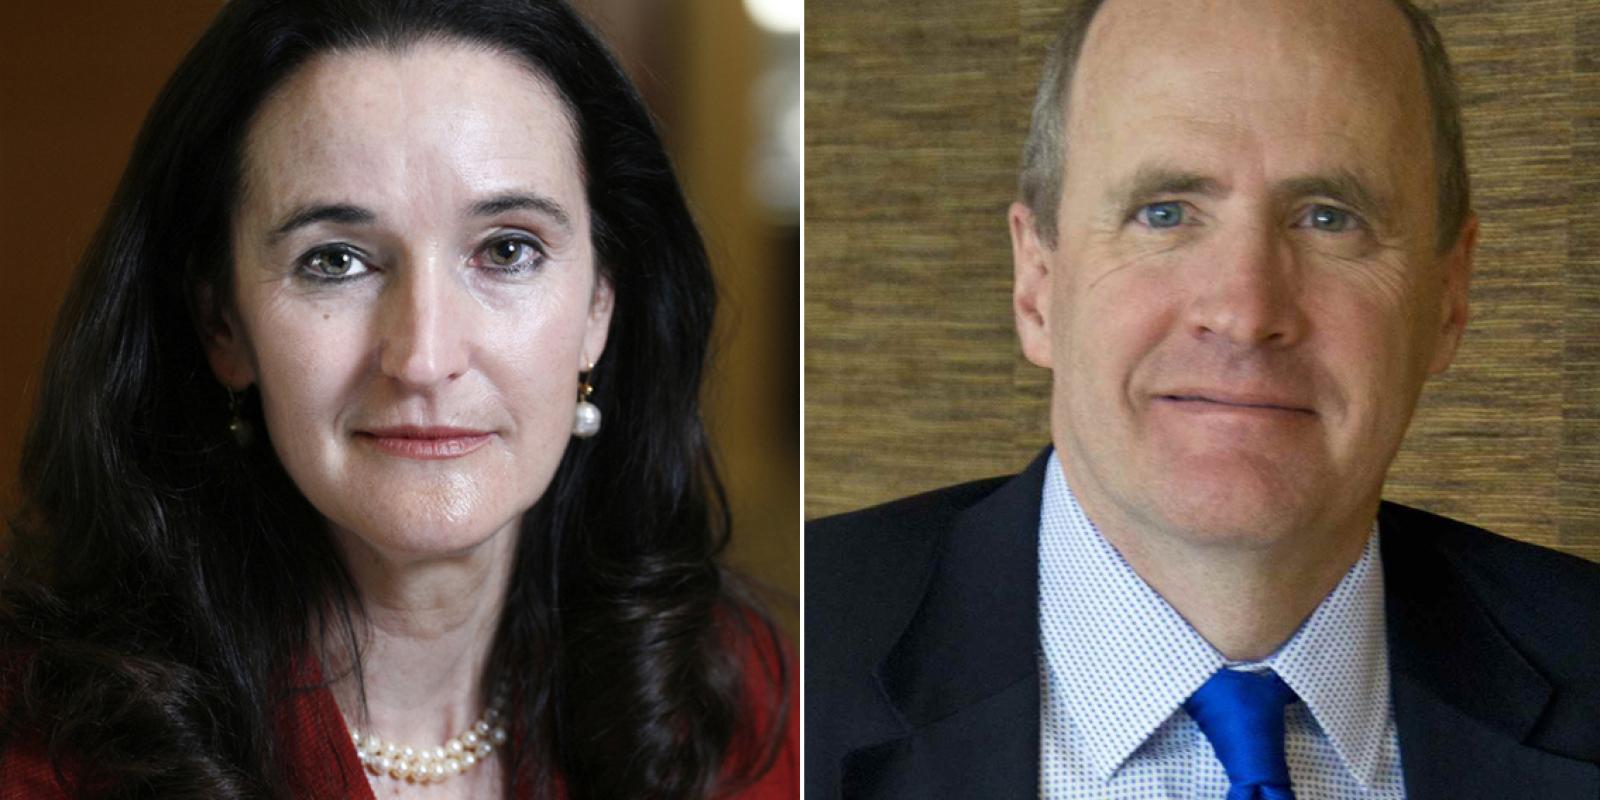 Teresa Barger, co-founder and managing director of Cartica Management, LLC, and Mark Turnage, CEO of OWL Cybersecurity, have both joined the Board of Trustees